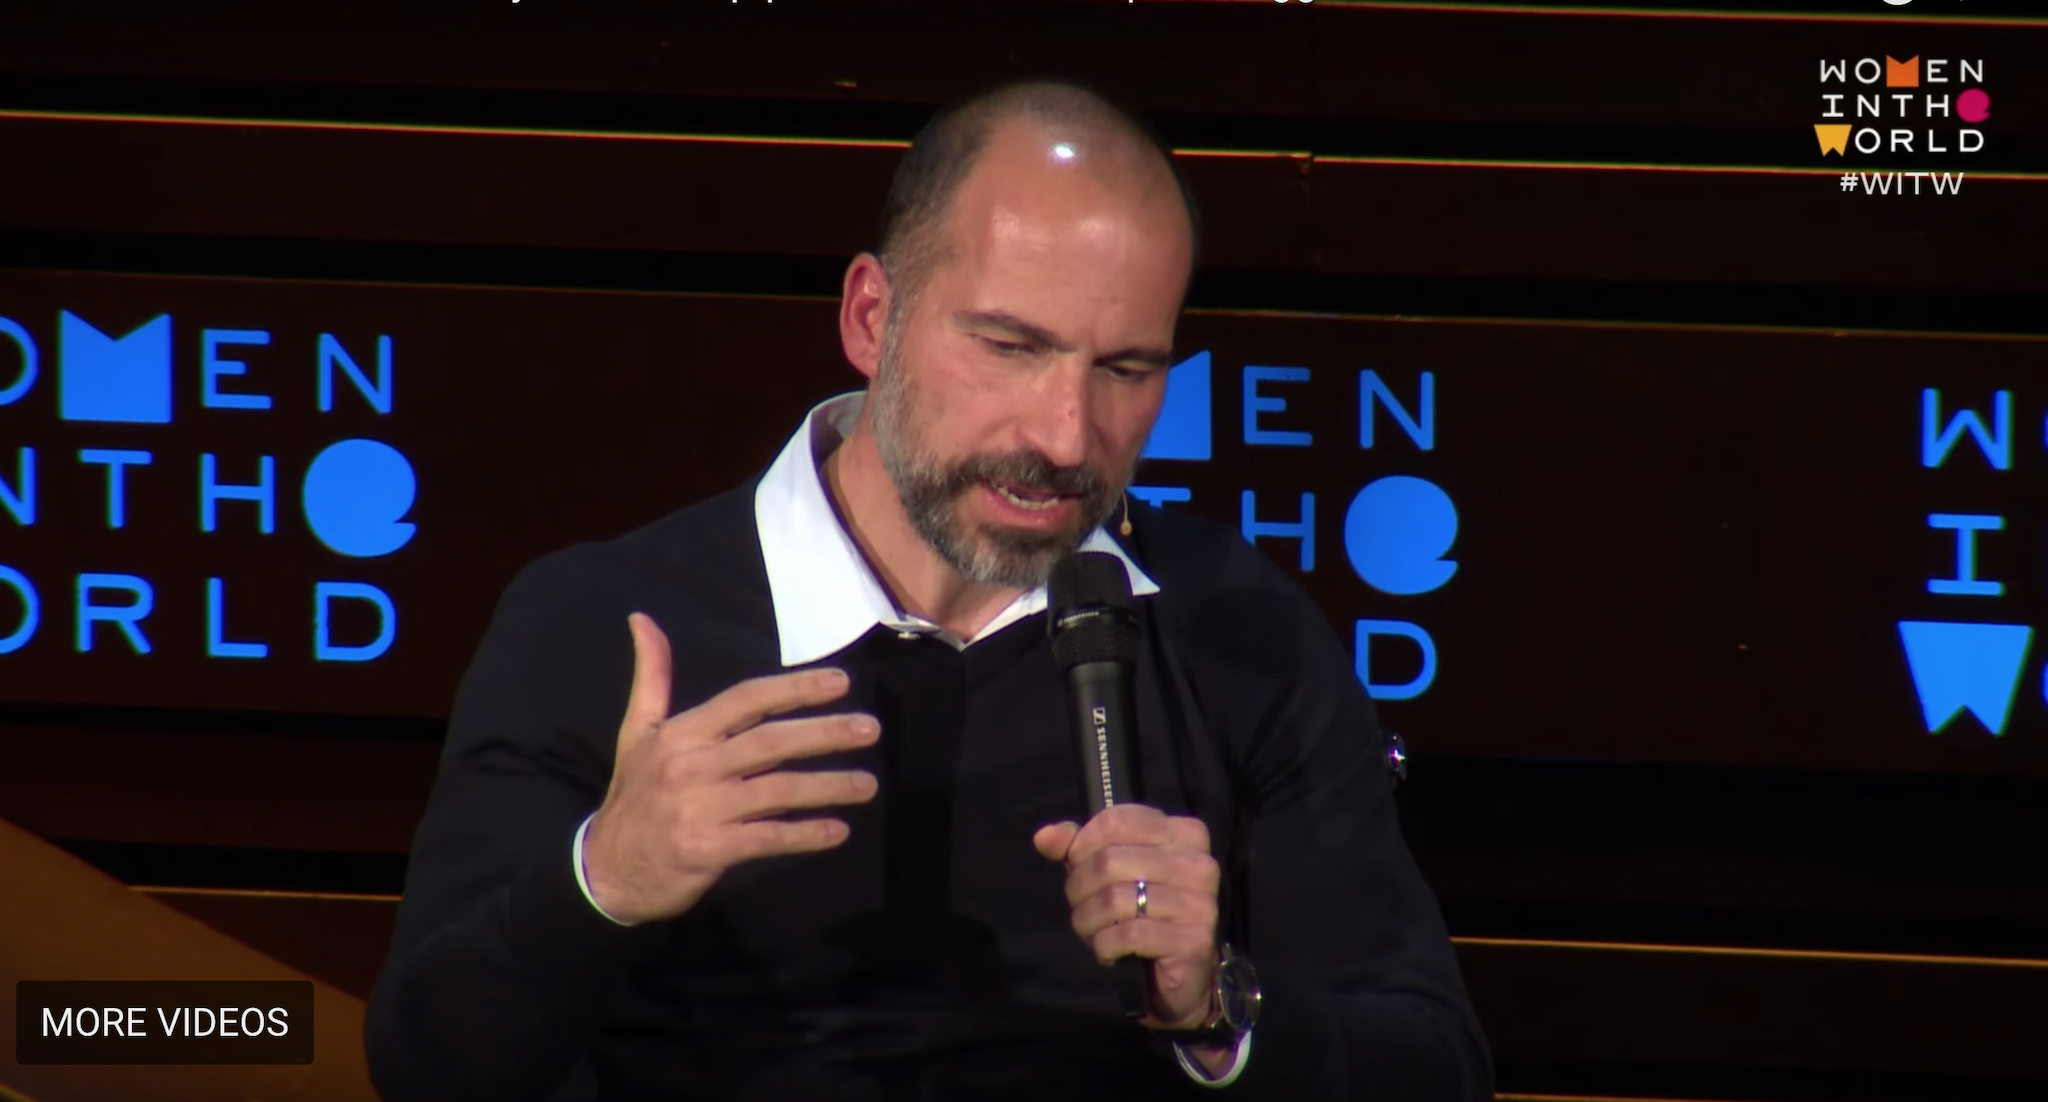 Dara Khosrowshahi at the Women in the World event on April 12, 2018